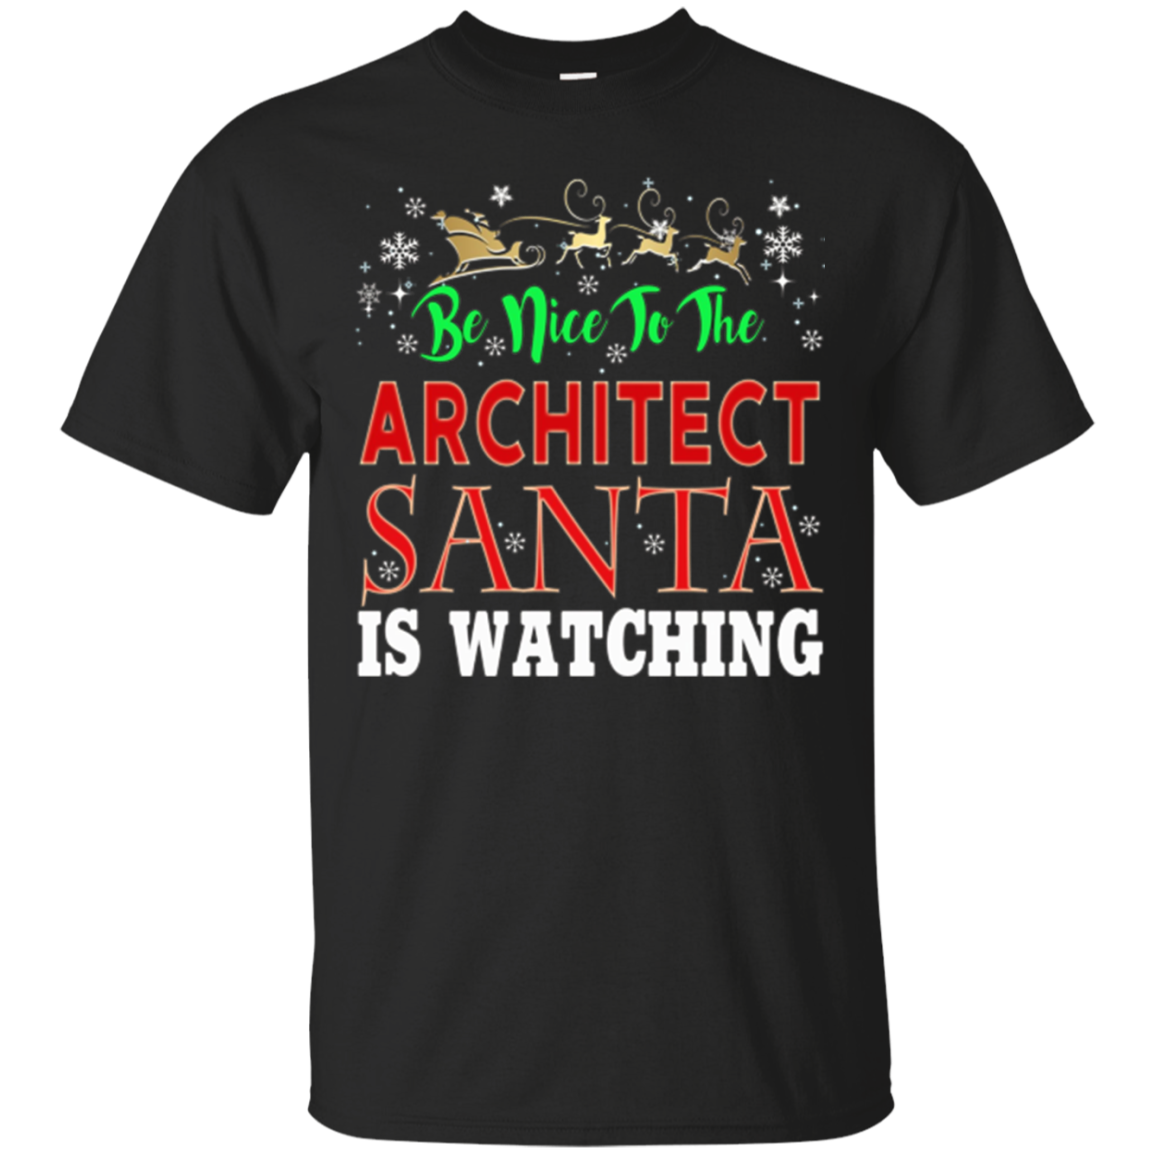 Be Nice To The Architect Santa Is Watching T-shirt